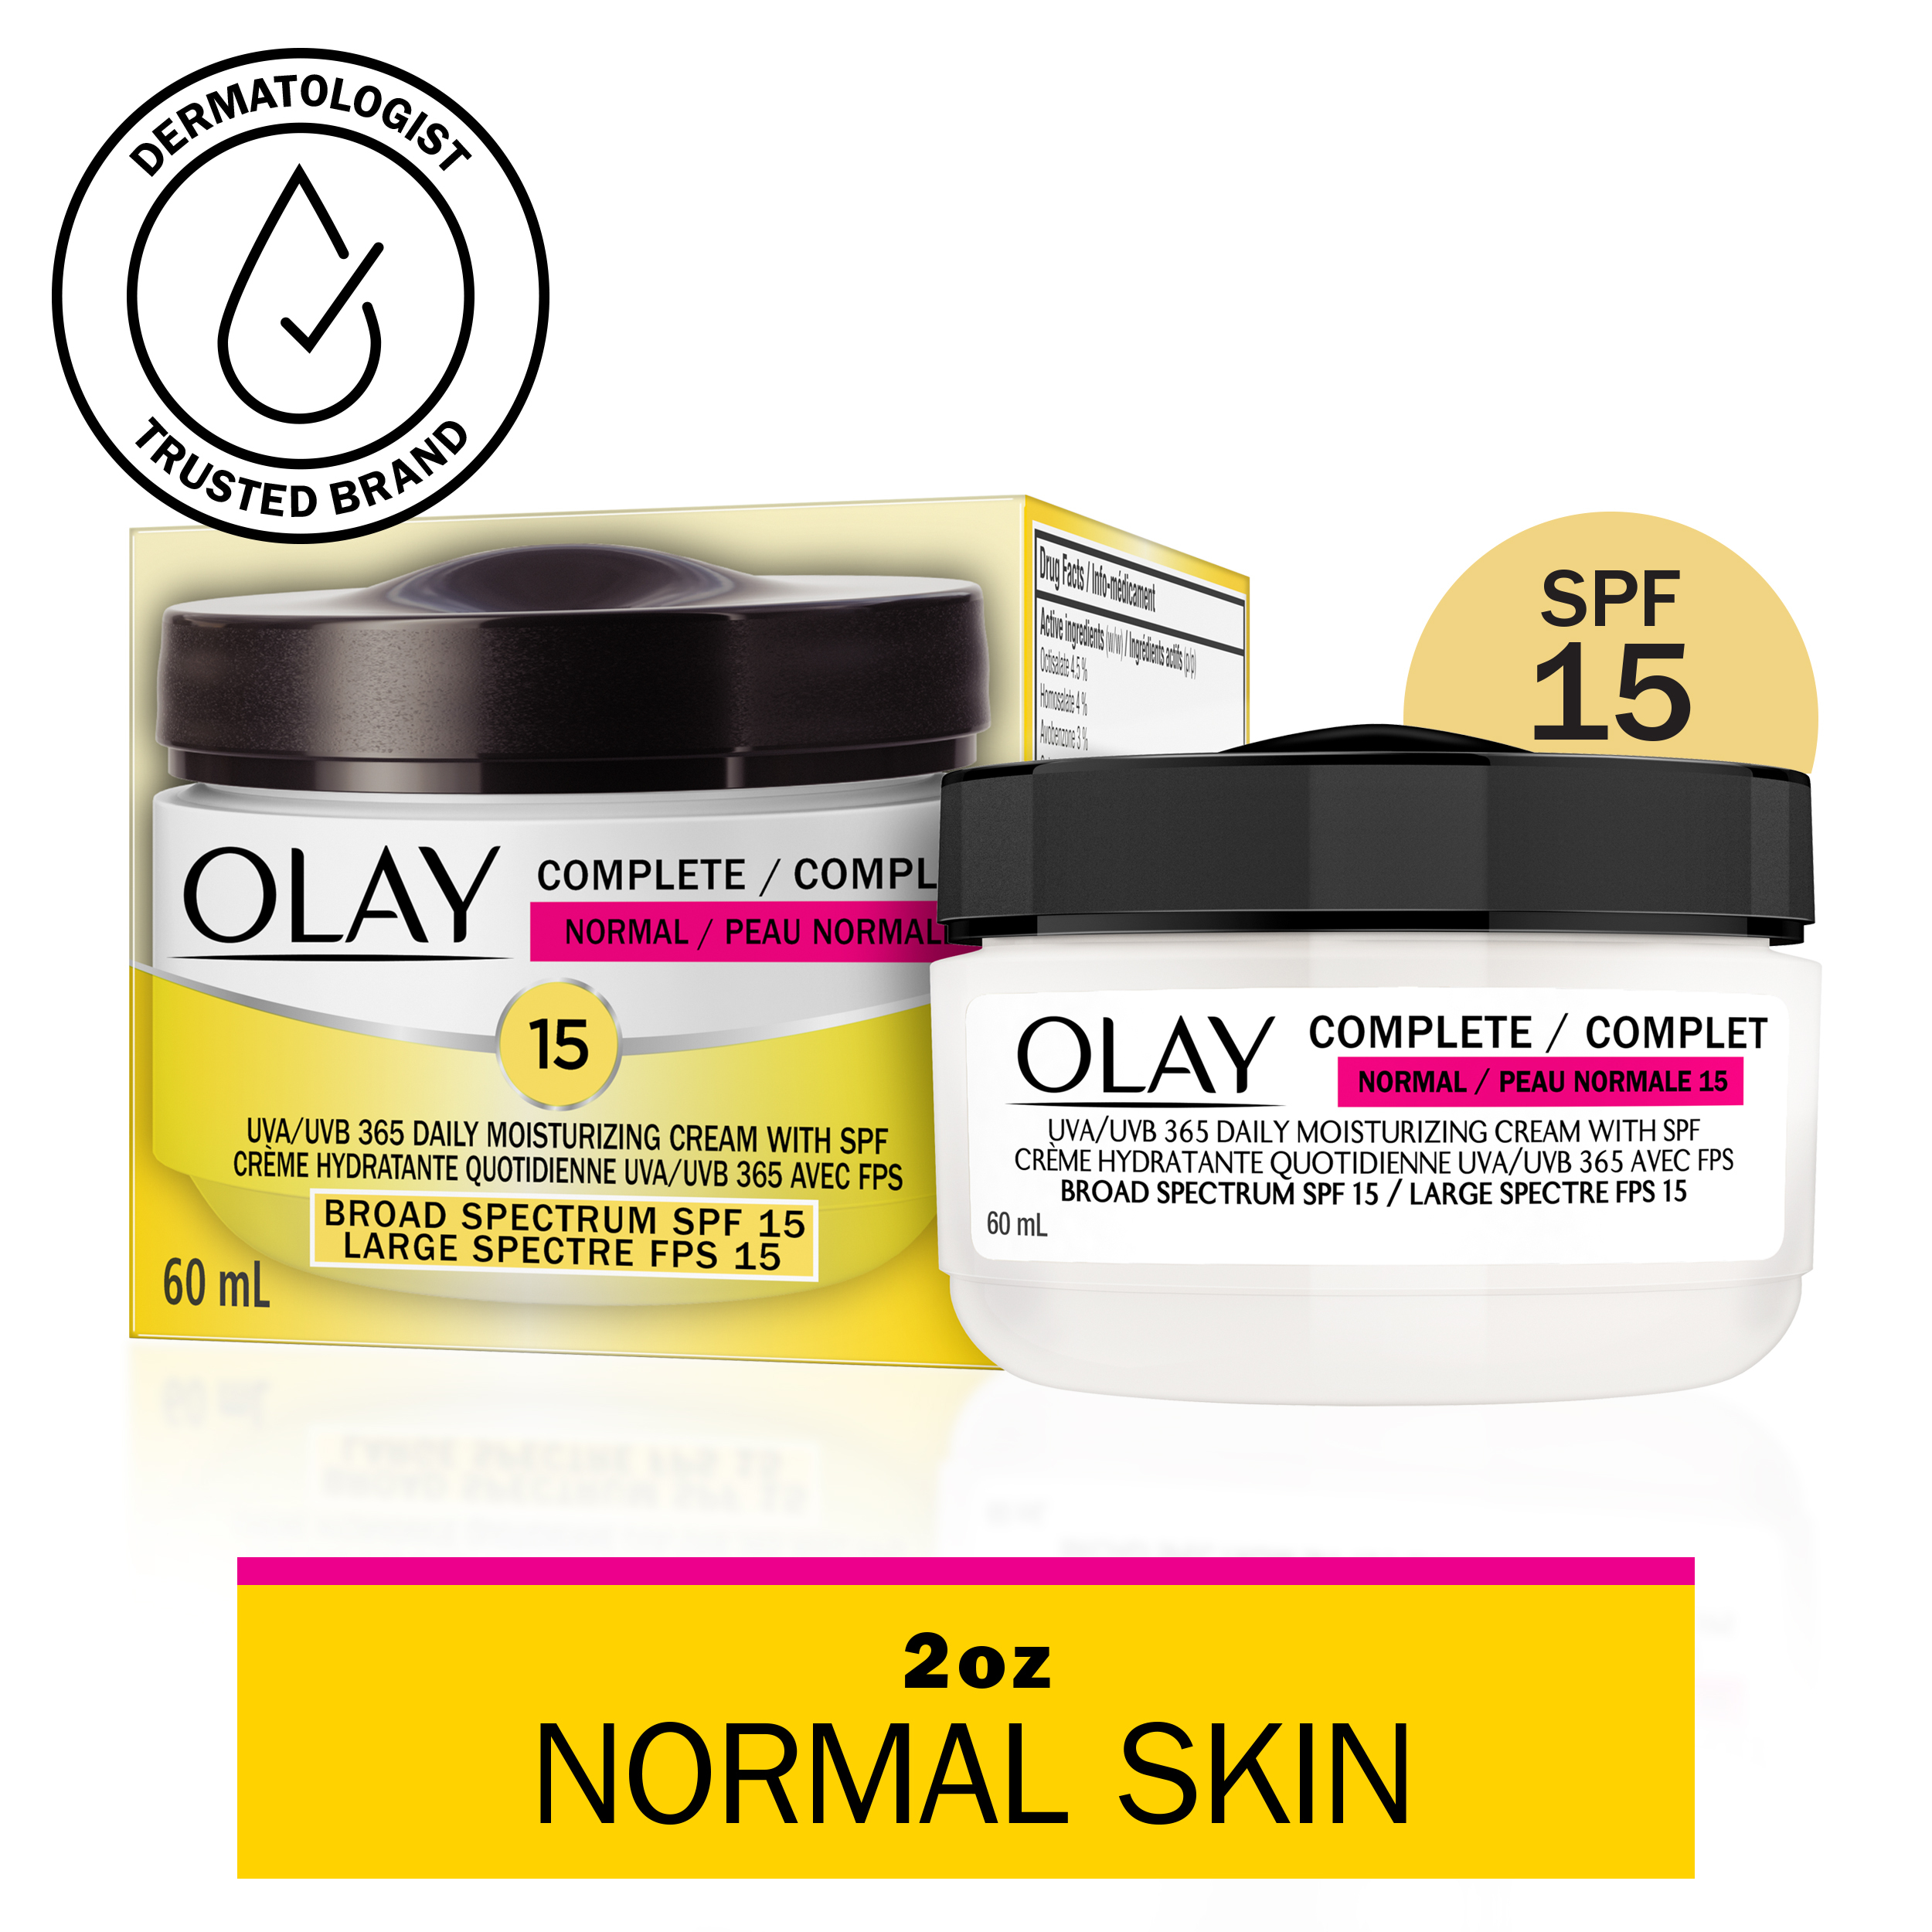 Olay Complete Cream Moisturizer with SPF 15 Normal, 2.0 oz - image 1 of 8